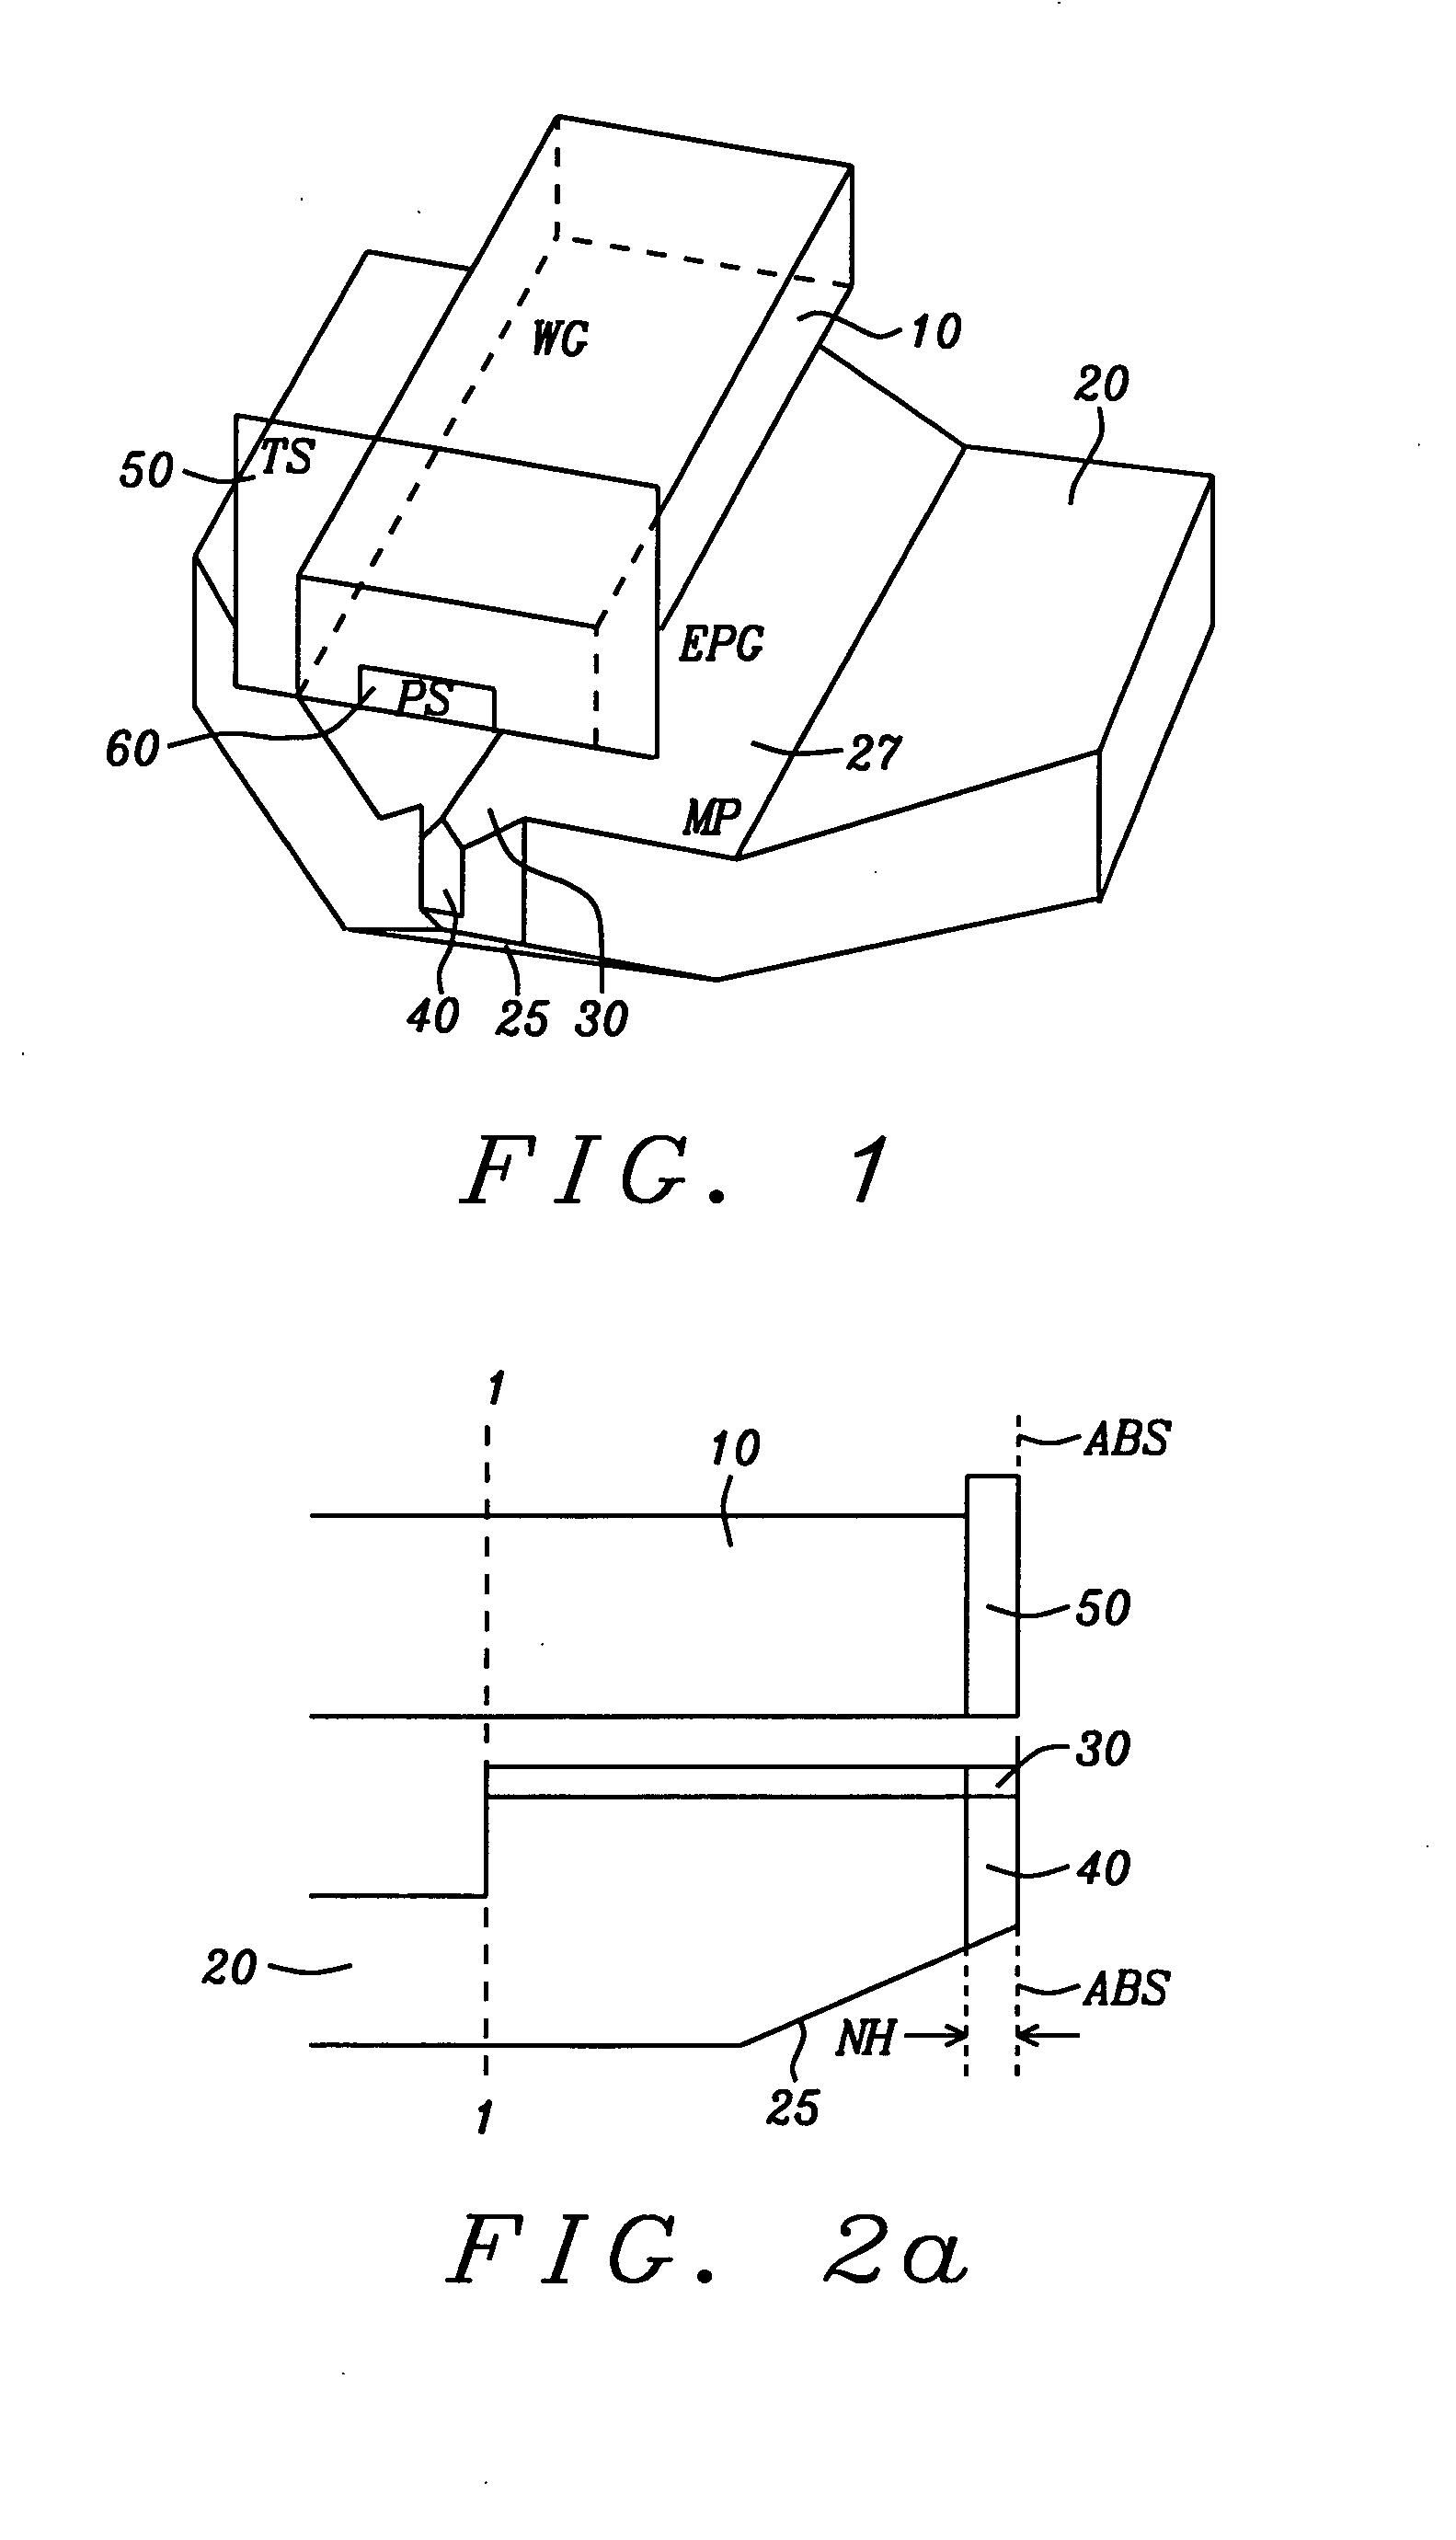 Heat assisted narrow pole design with trailing shield